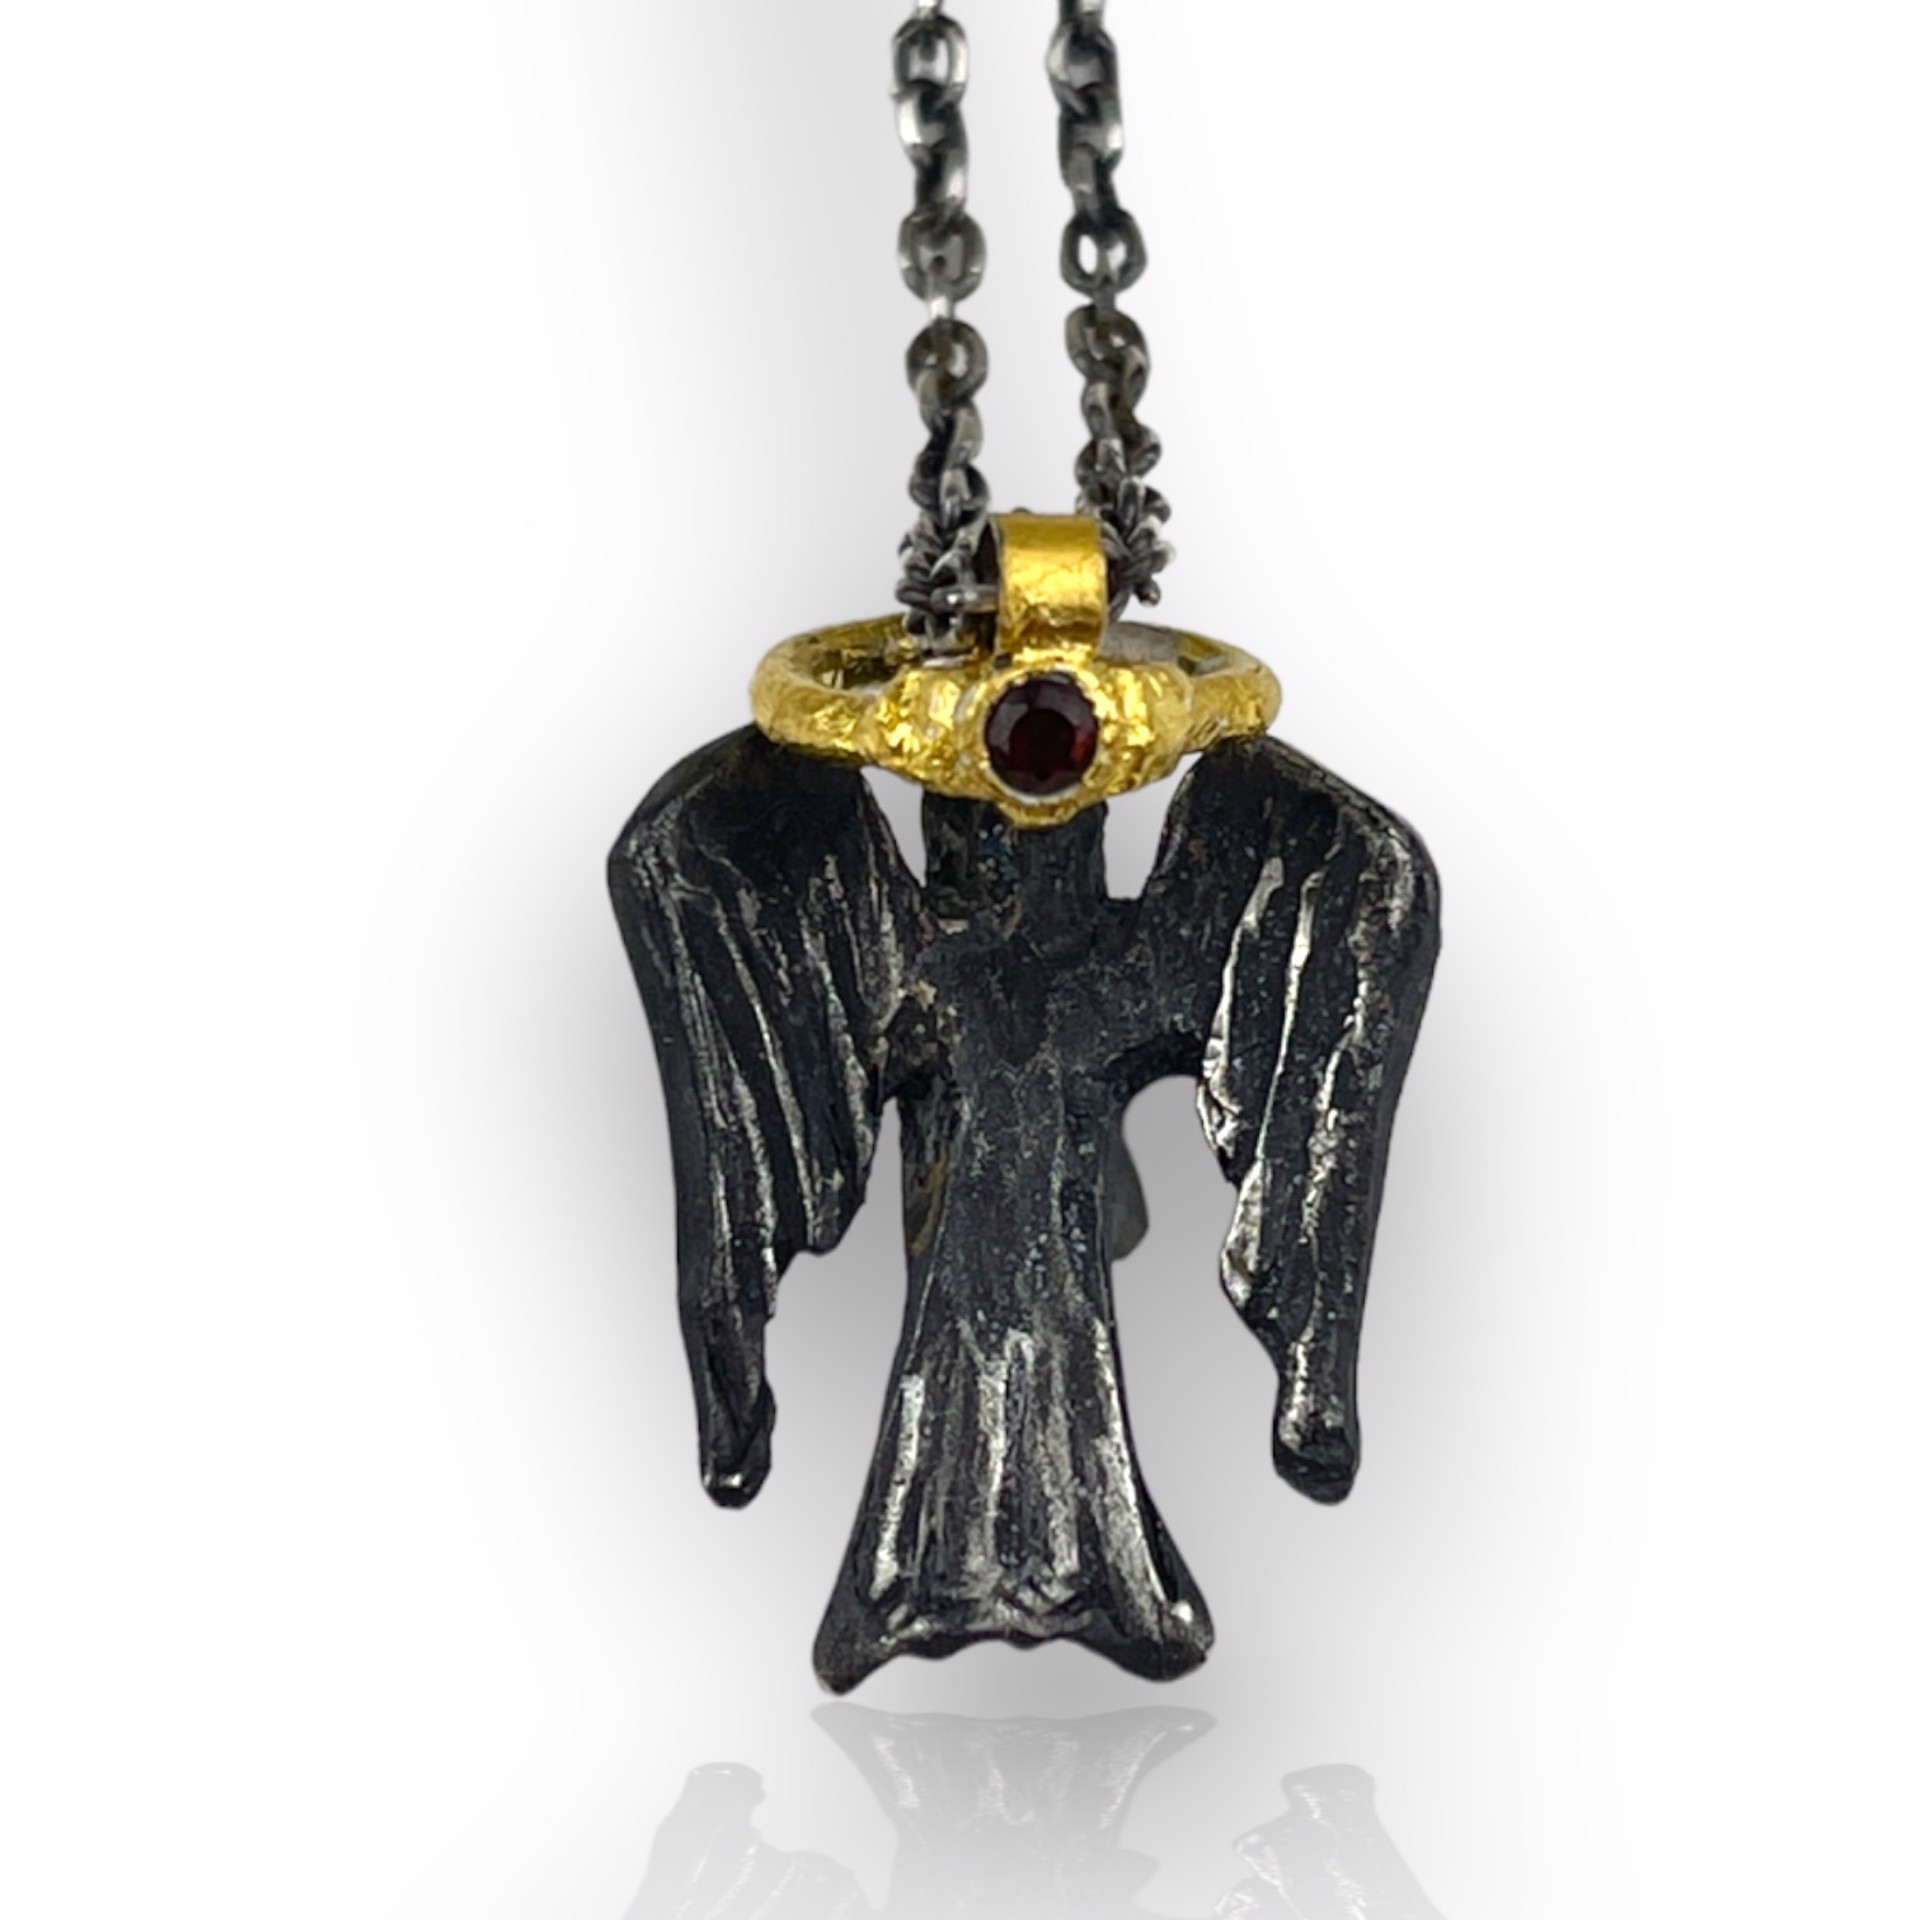 Raven & Ring Necklace with Garnets by Terry Williams Brau